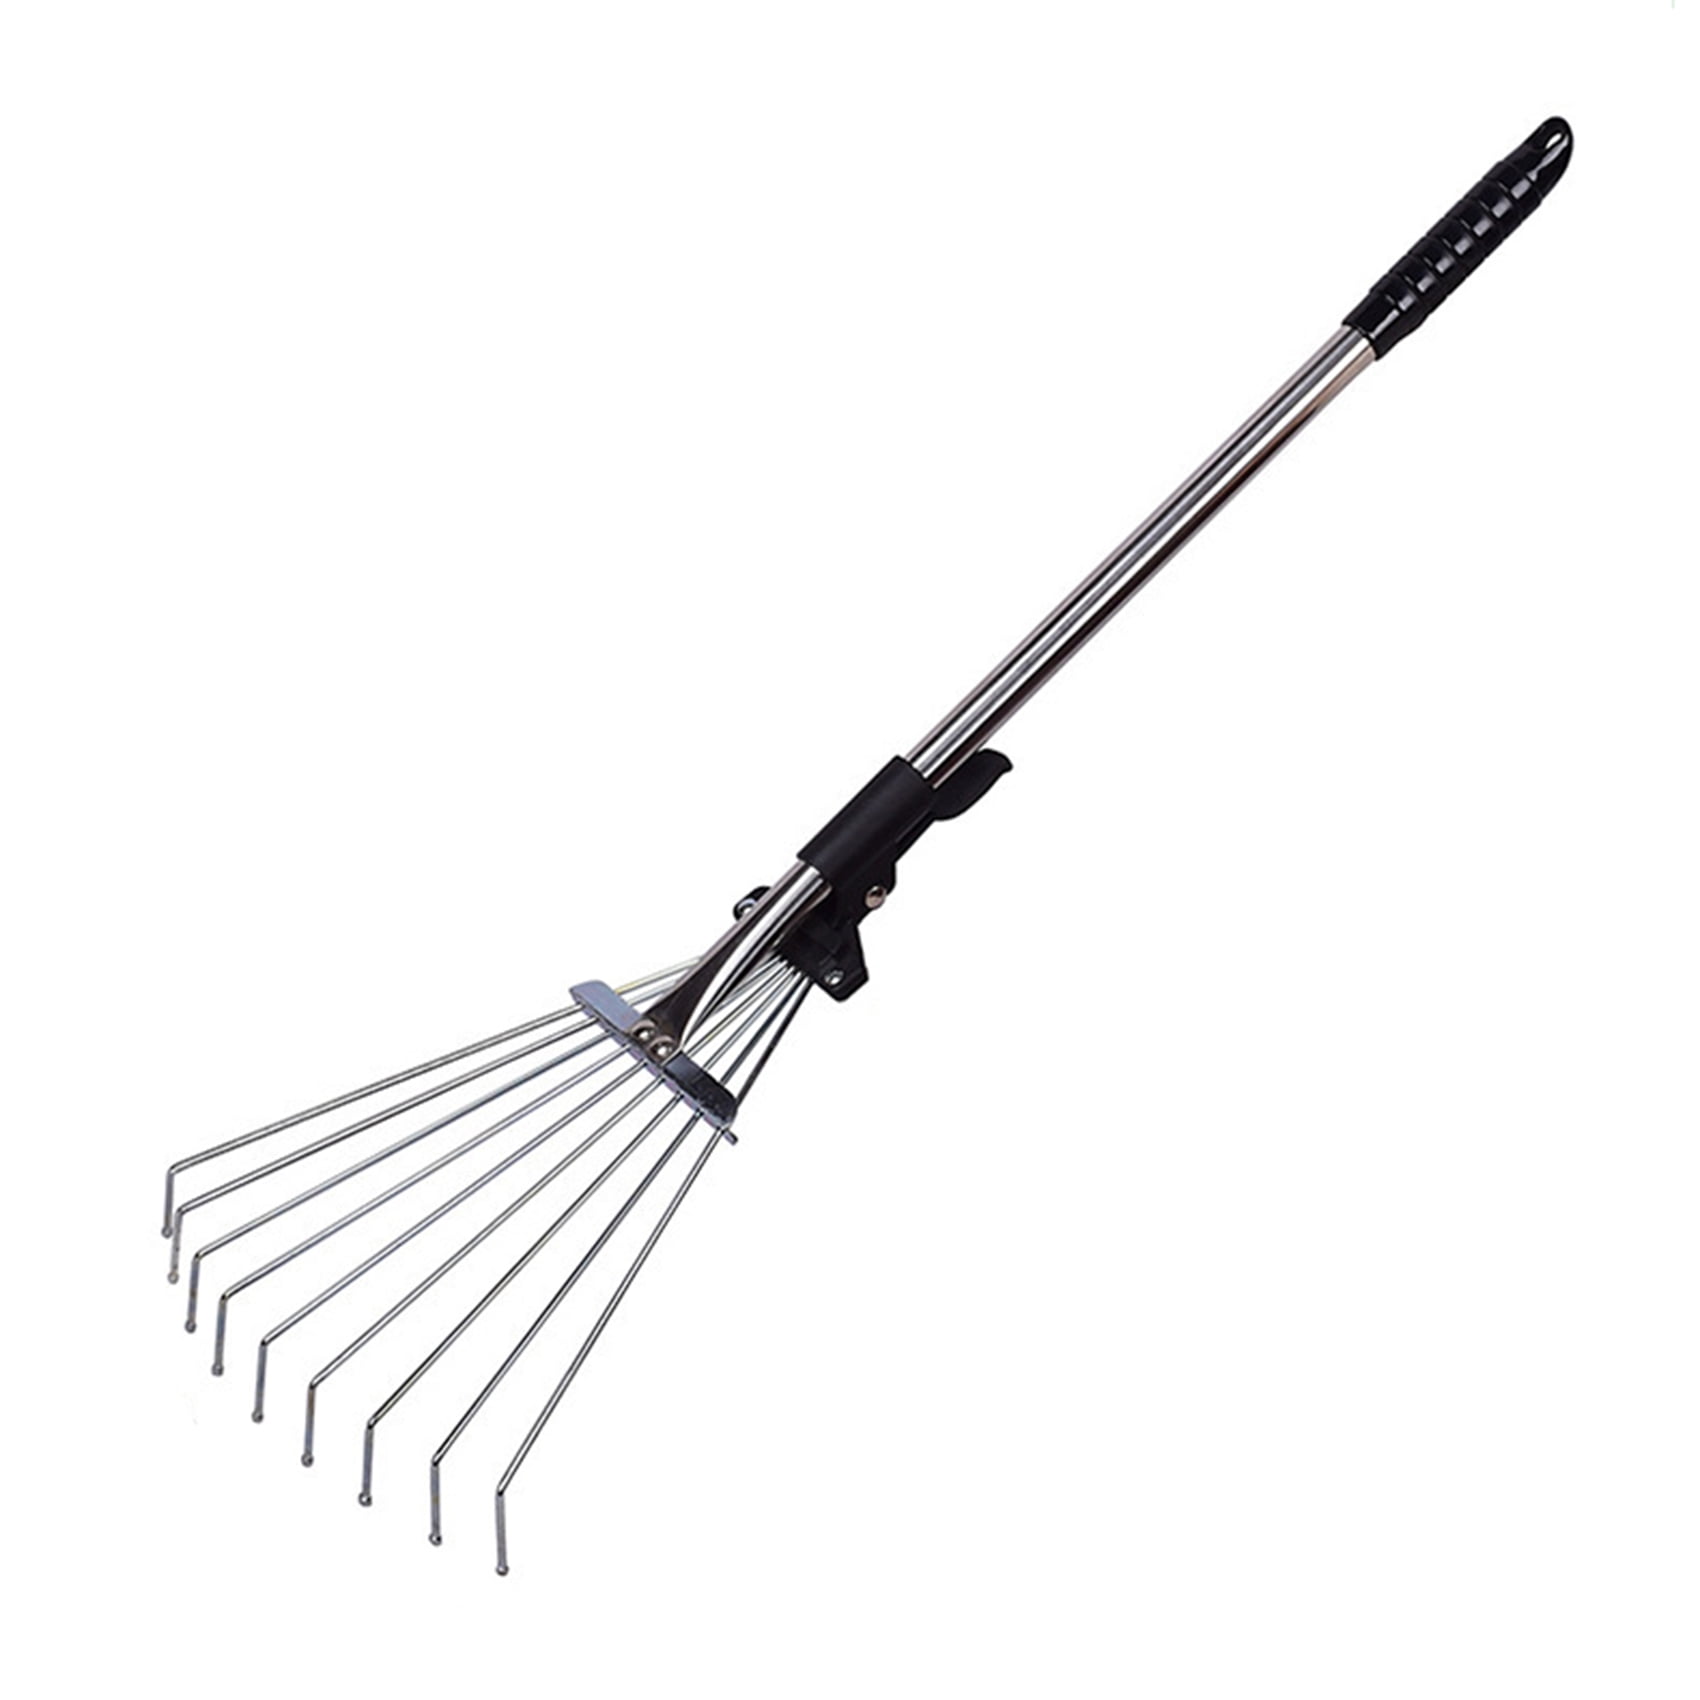 Adjustable Telescopic Rake with Extendable H andle&Fan Head Stainless ...